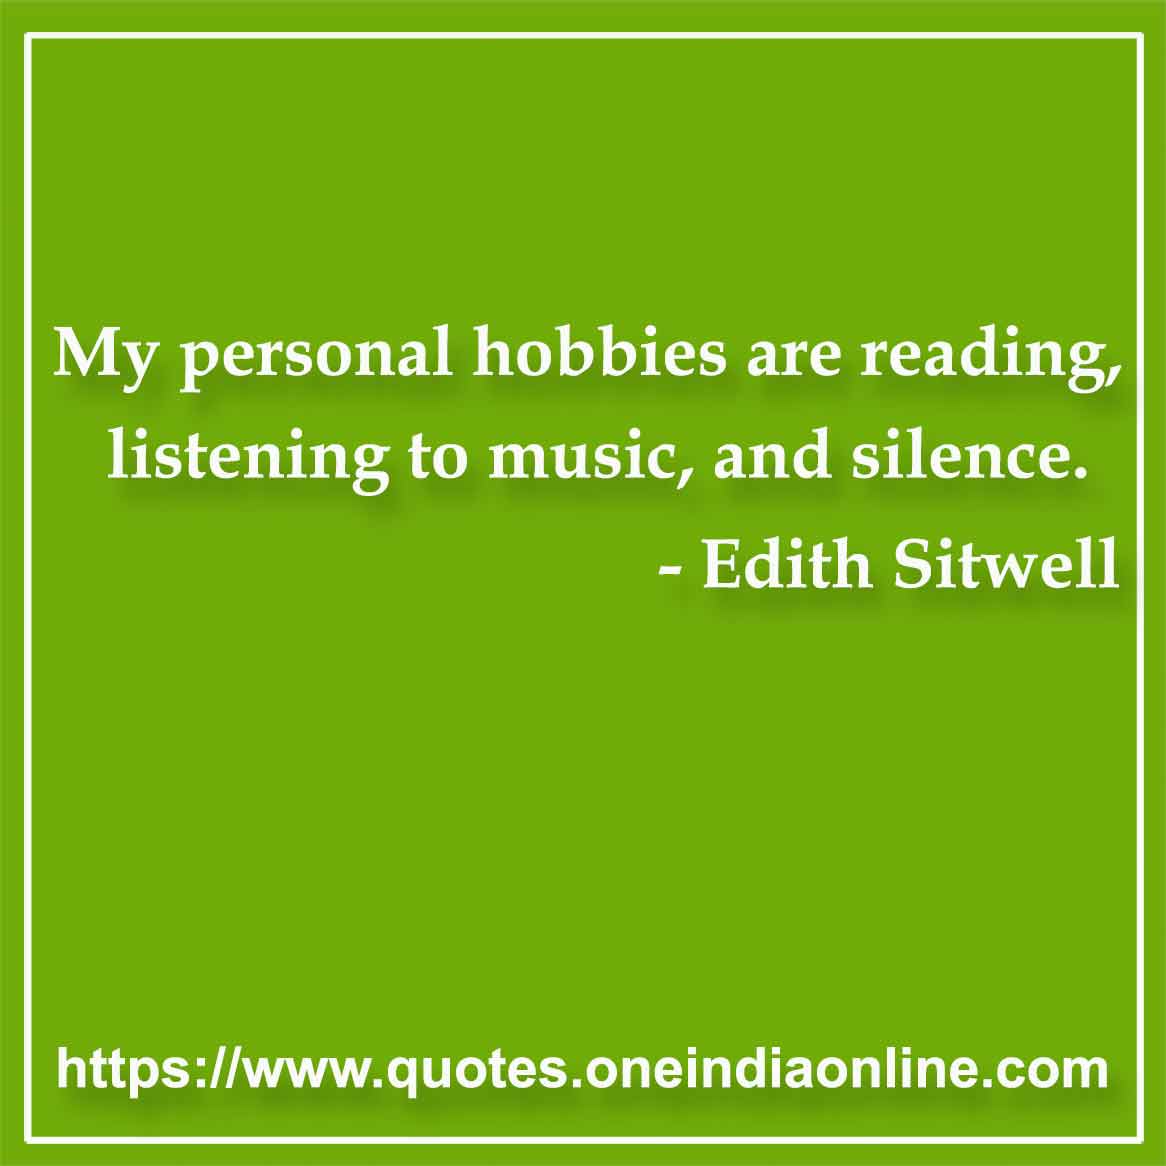 My personal hobbies are reading, listening to music, and silence.

- Music Quotes by Edith Sitwell 